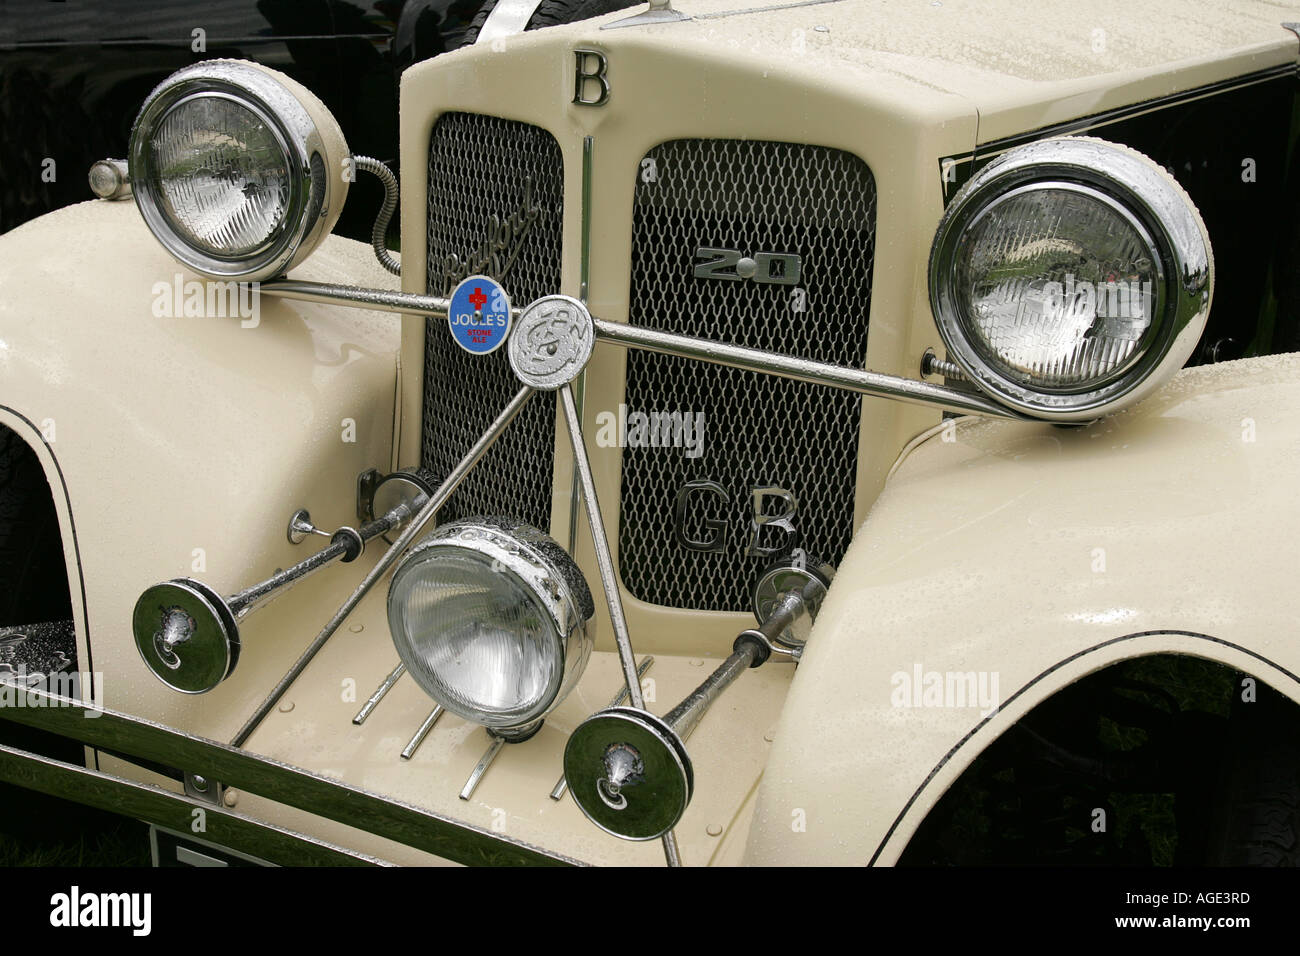 Beauford American old car classic history vehicle vintage antipodes symbol collector age golden motoring transport restoration Stock Photo